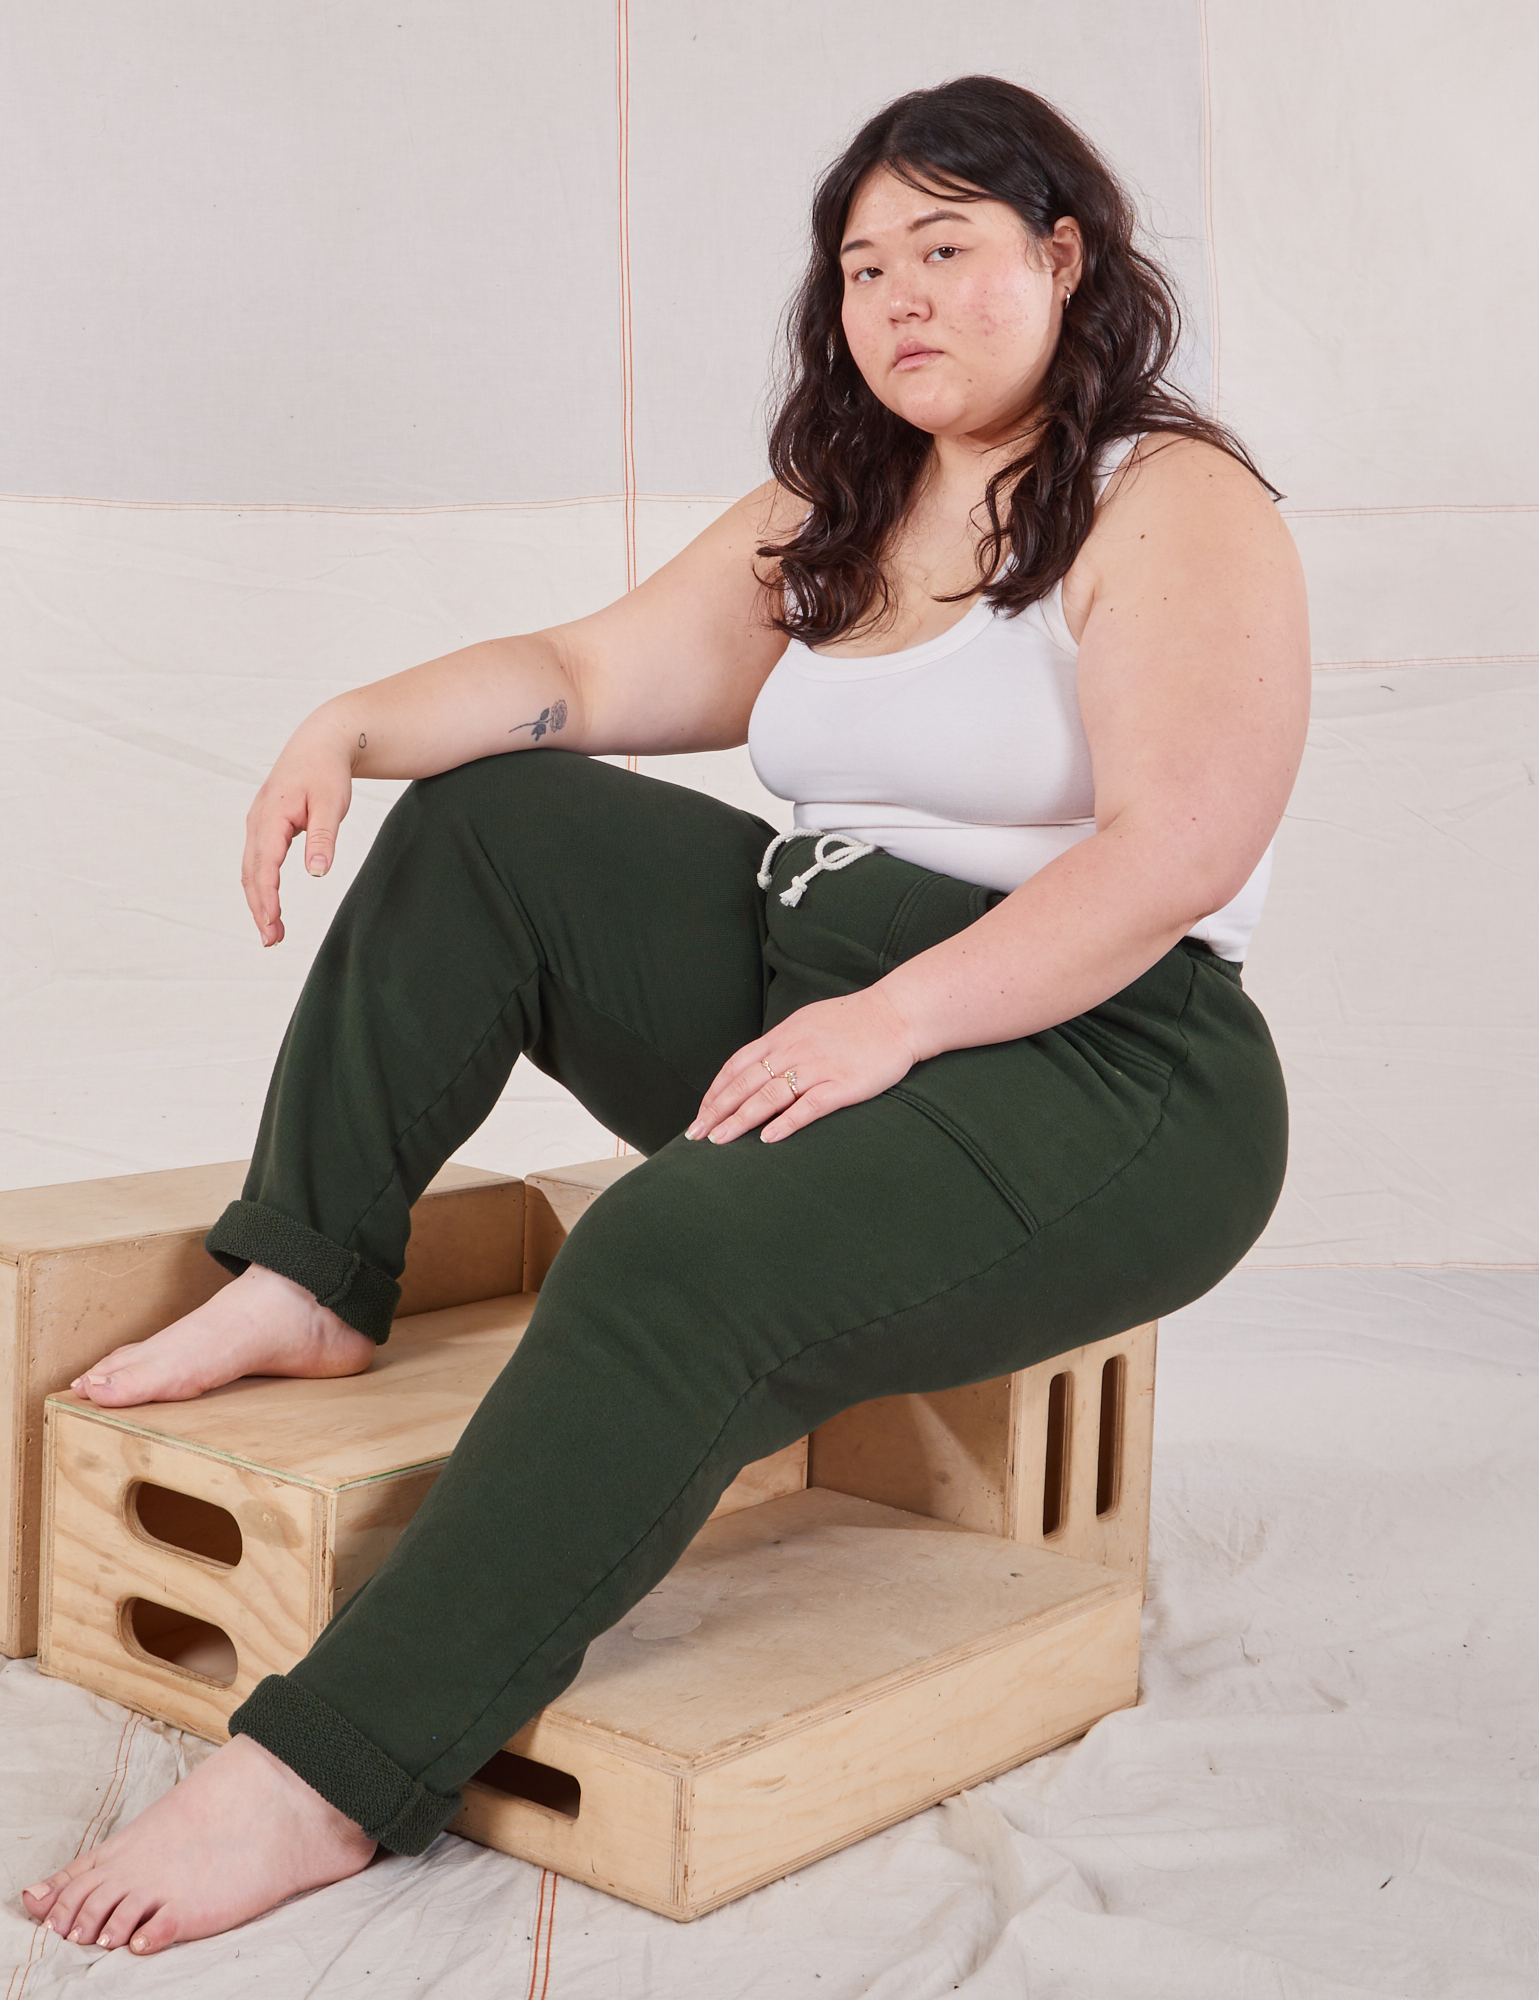 Ashley is wearing Rolled Cuff Sweat Pants in Swamp Green and vintage off-white Cropped Tank Top. She is sitting on a wooden crate.